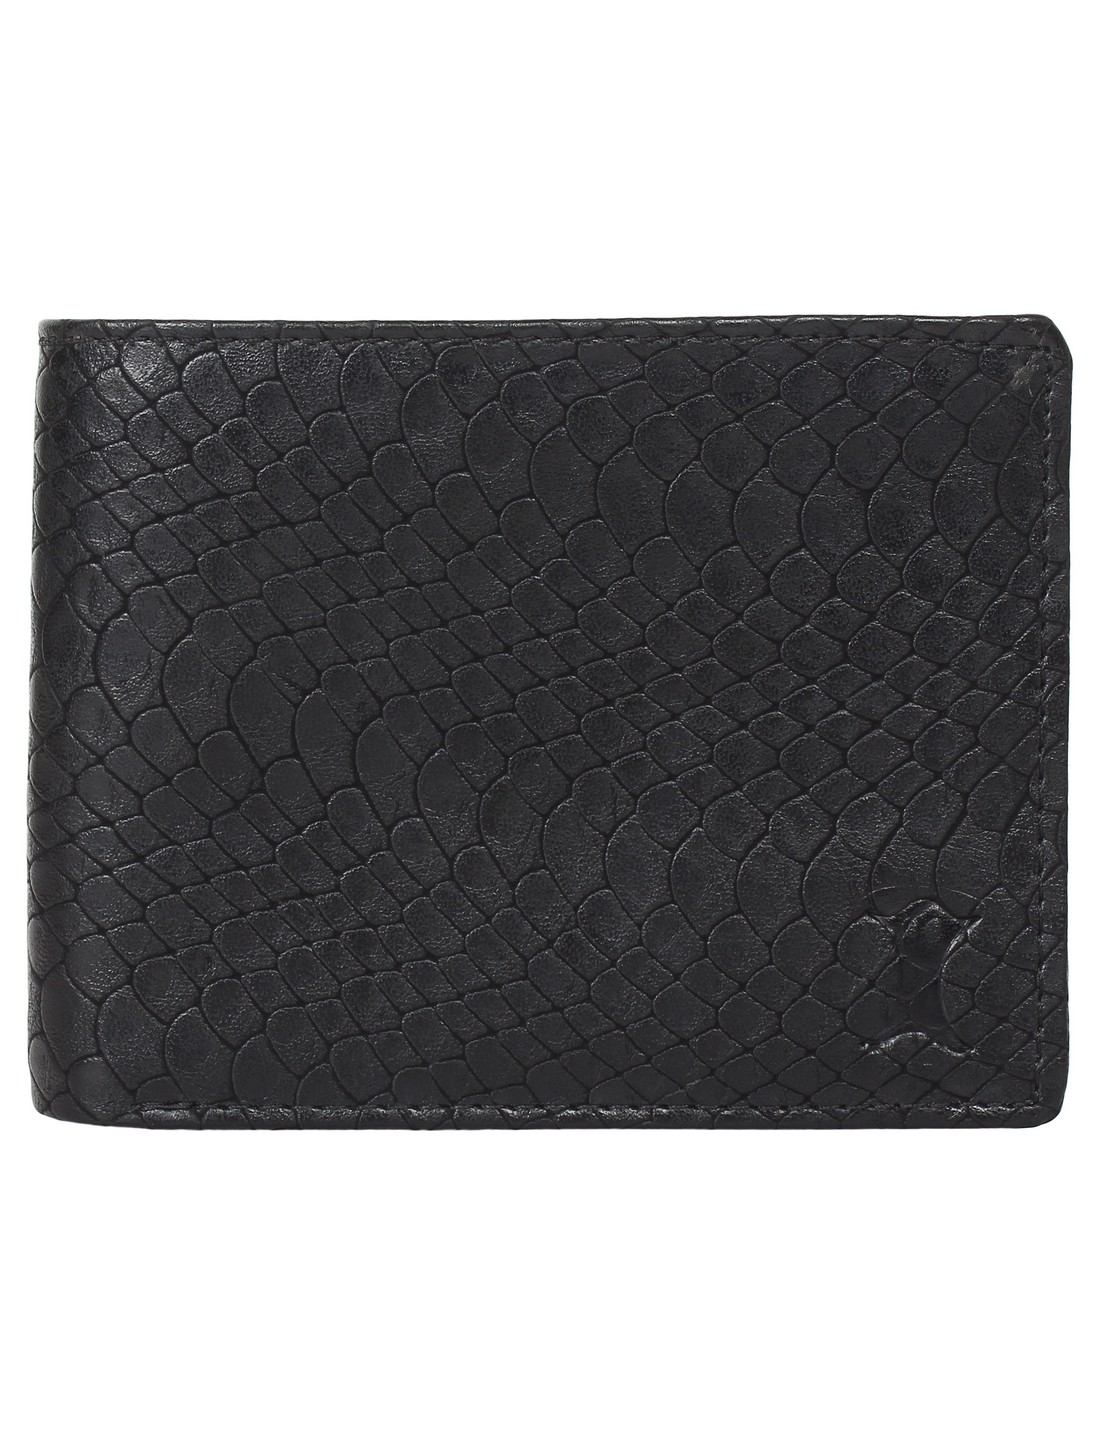 CREATURE | CREATURE Designer Pu-Leather Wallet with Coin Pocket for Men